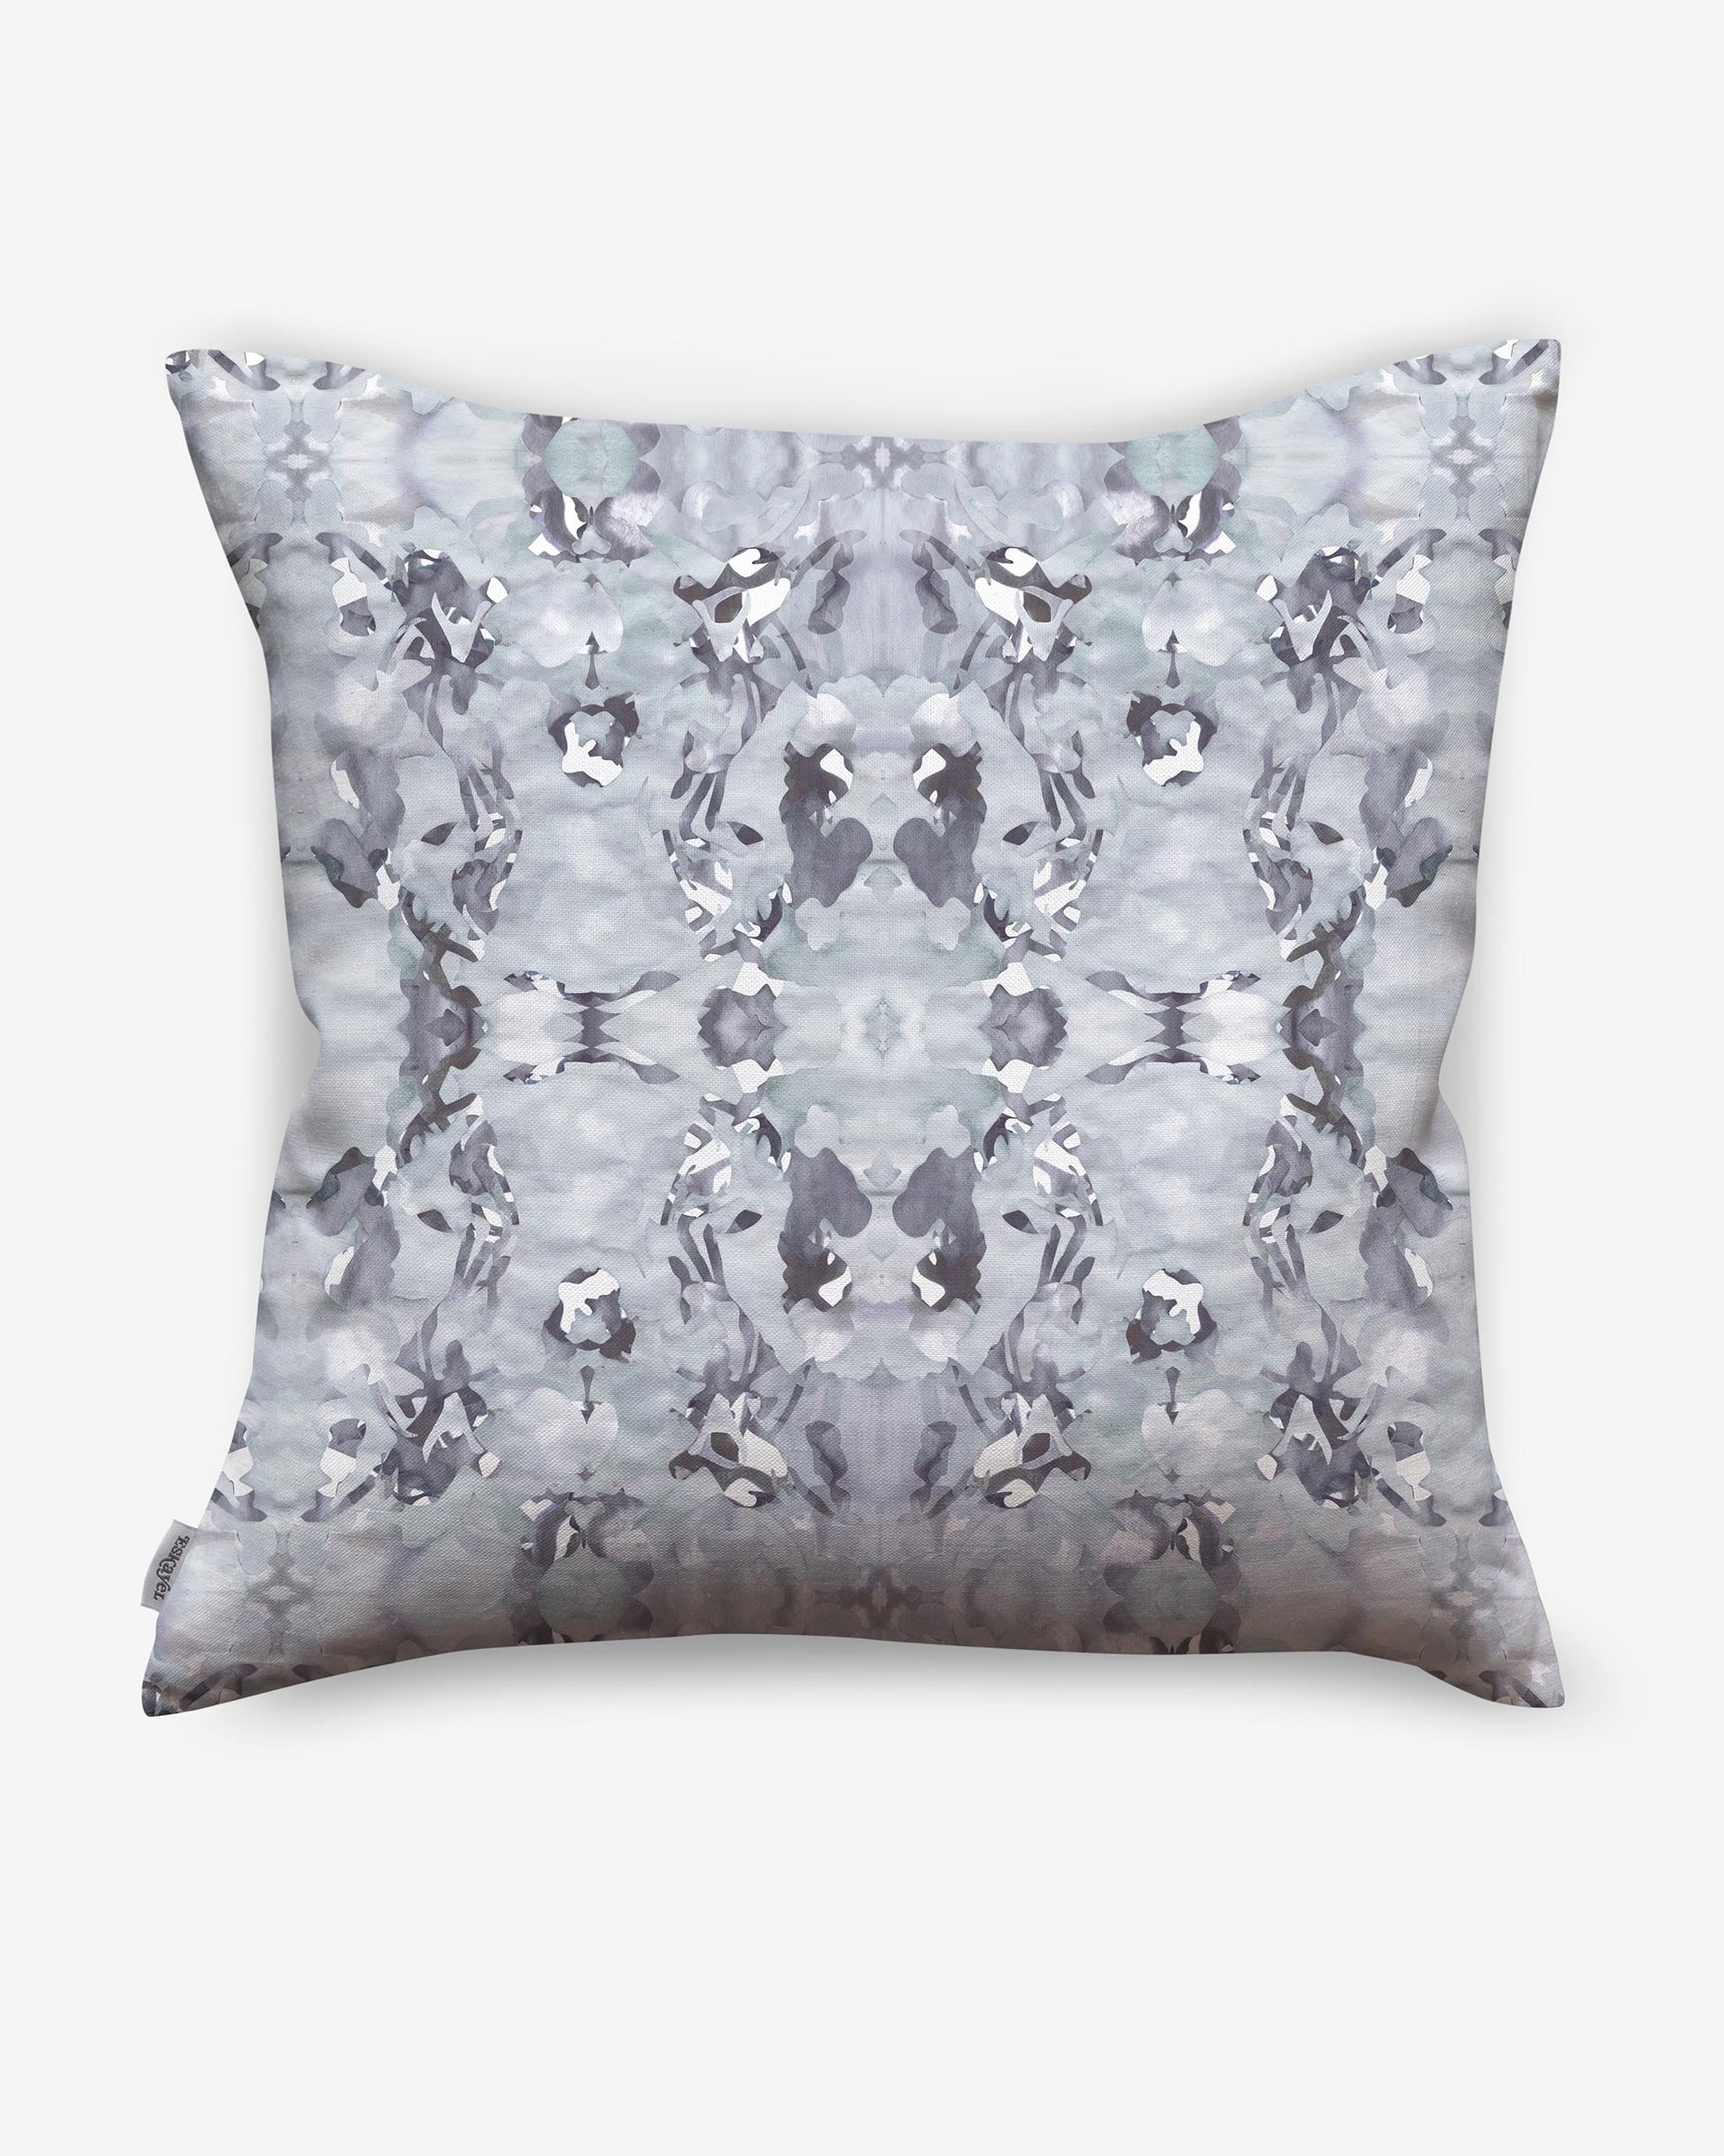 A grey and white pillow with a Huerfano Pillow Navy design